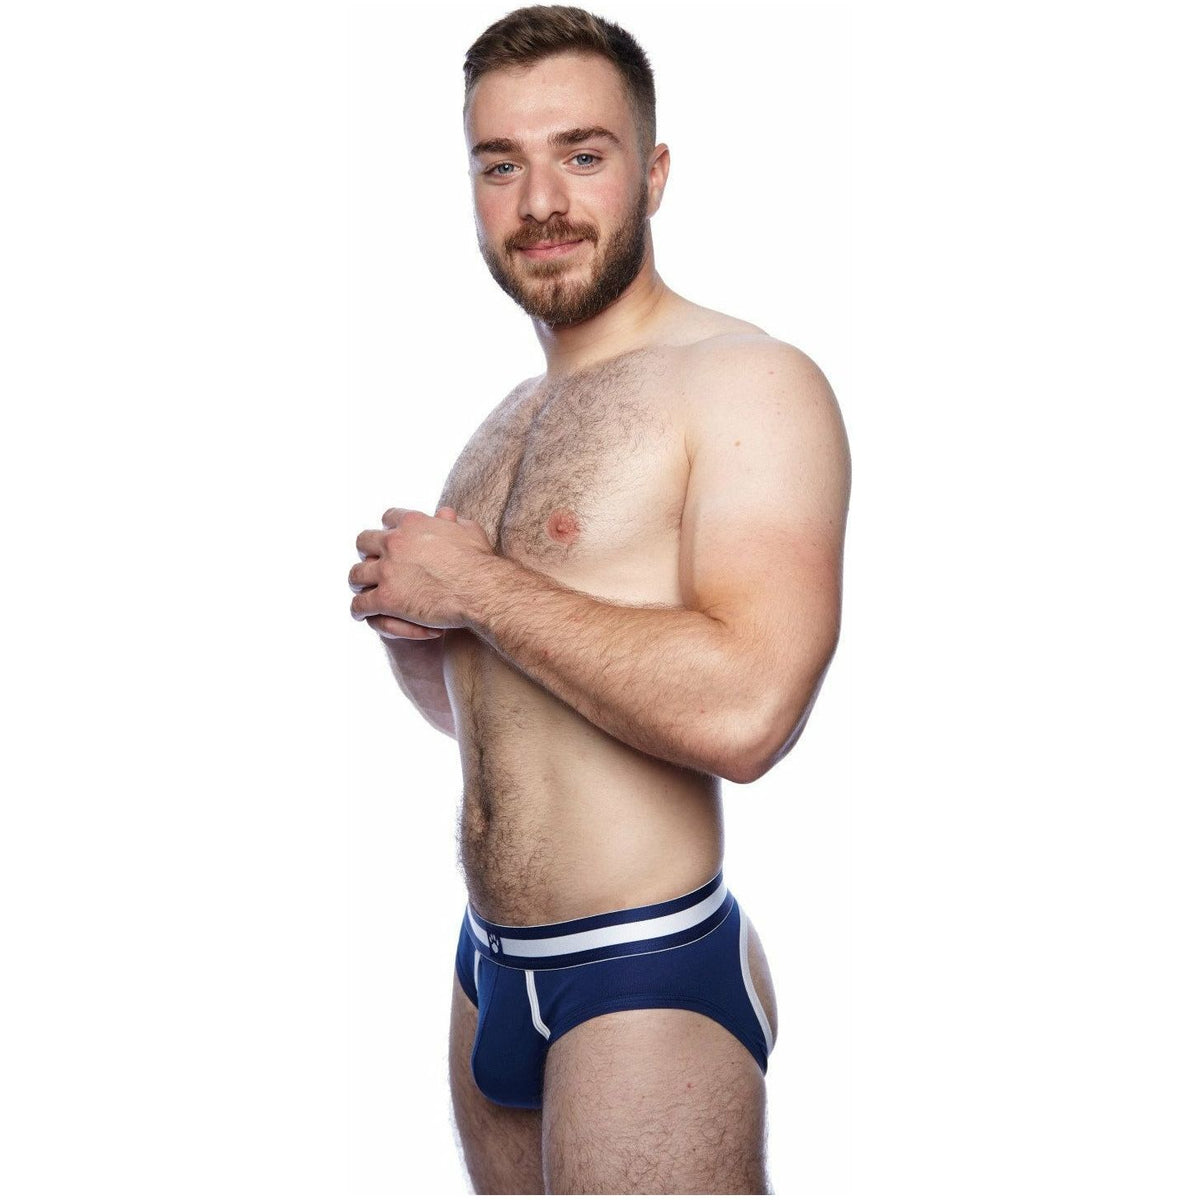 Prowler Classic Backless Brief – Navy/White - Small